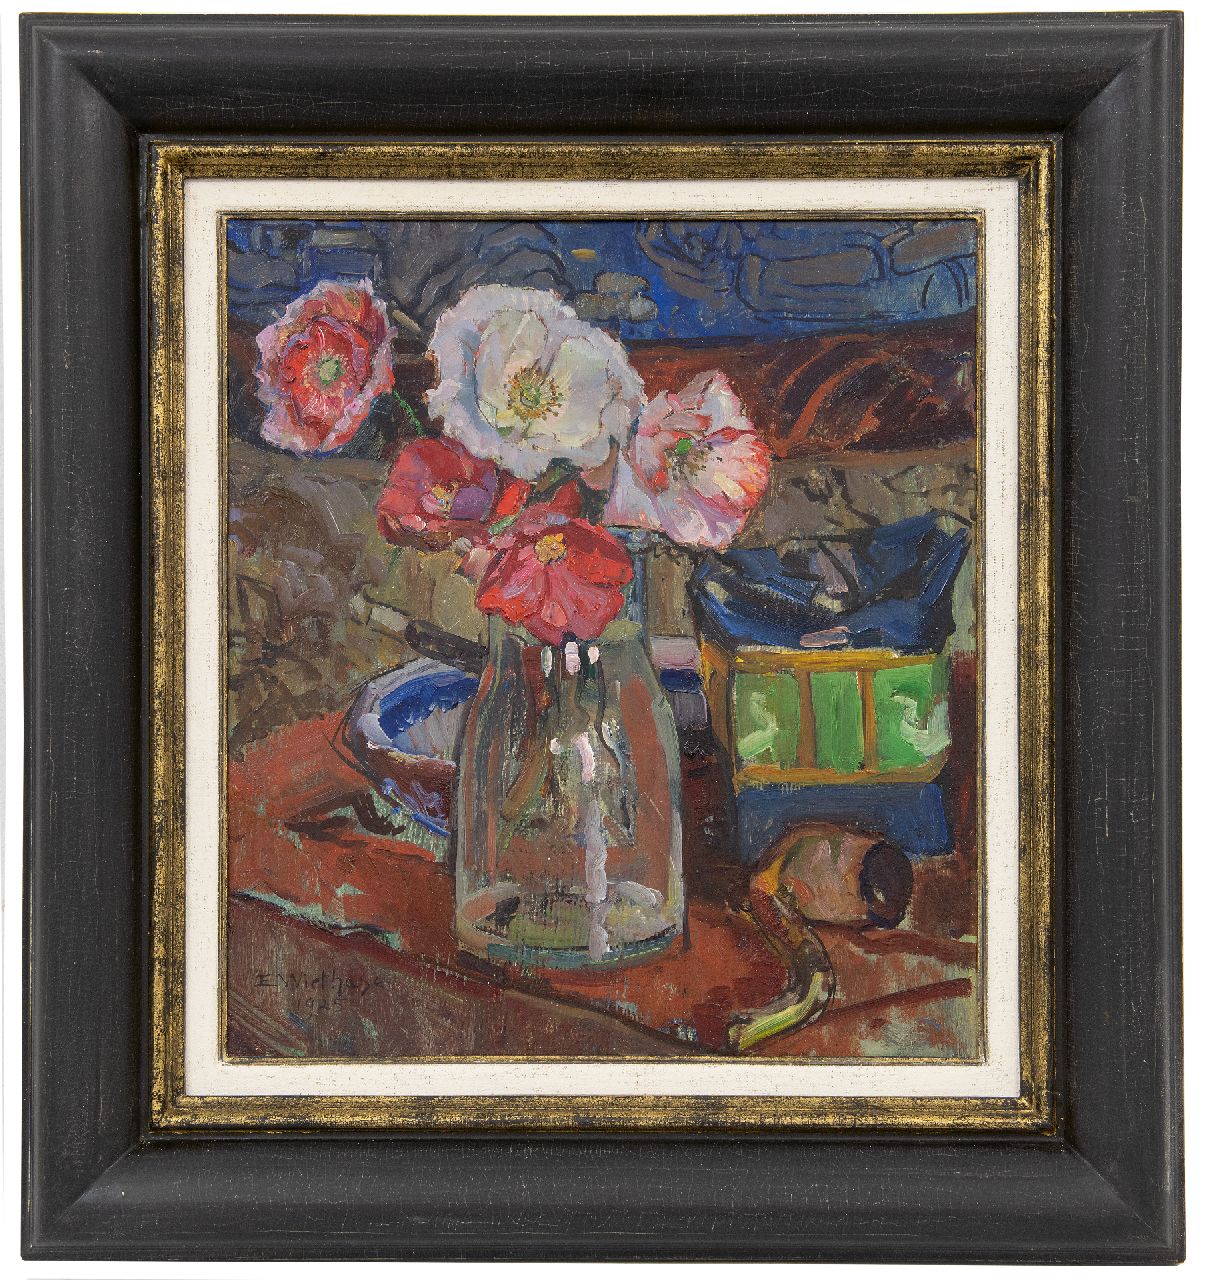 Wiethase E.  | Edgard Wiethase, Poppies in a vase, oil on panel 39.3 x 35.1 cm, signed l.l. and dated 1925